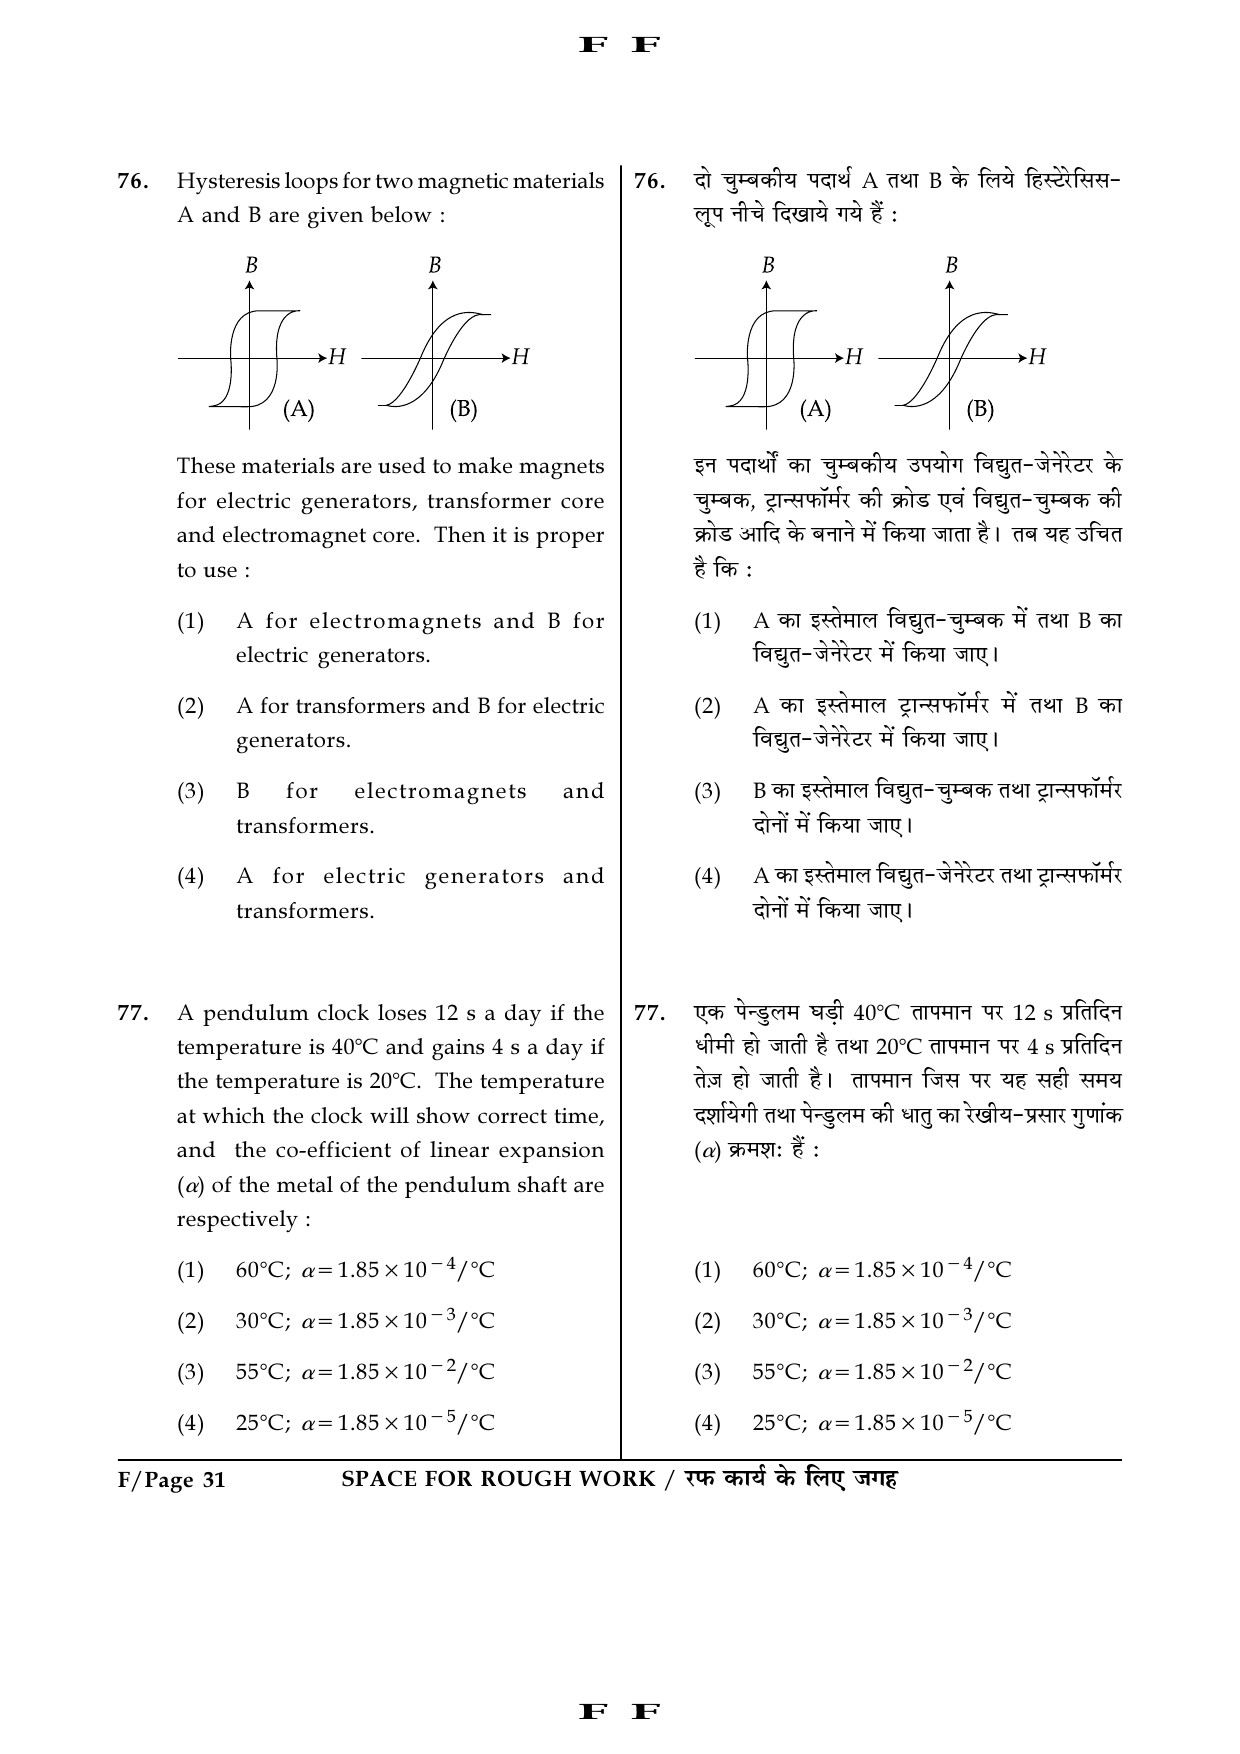 JEE Main Exam Question Paper 2016 Booklet F 31